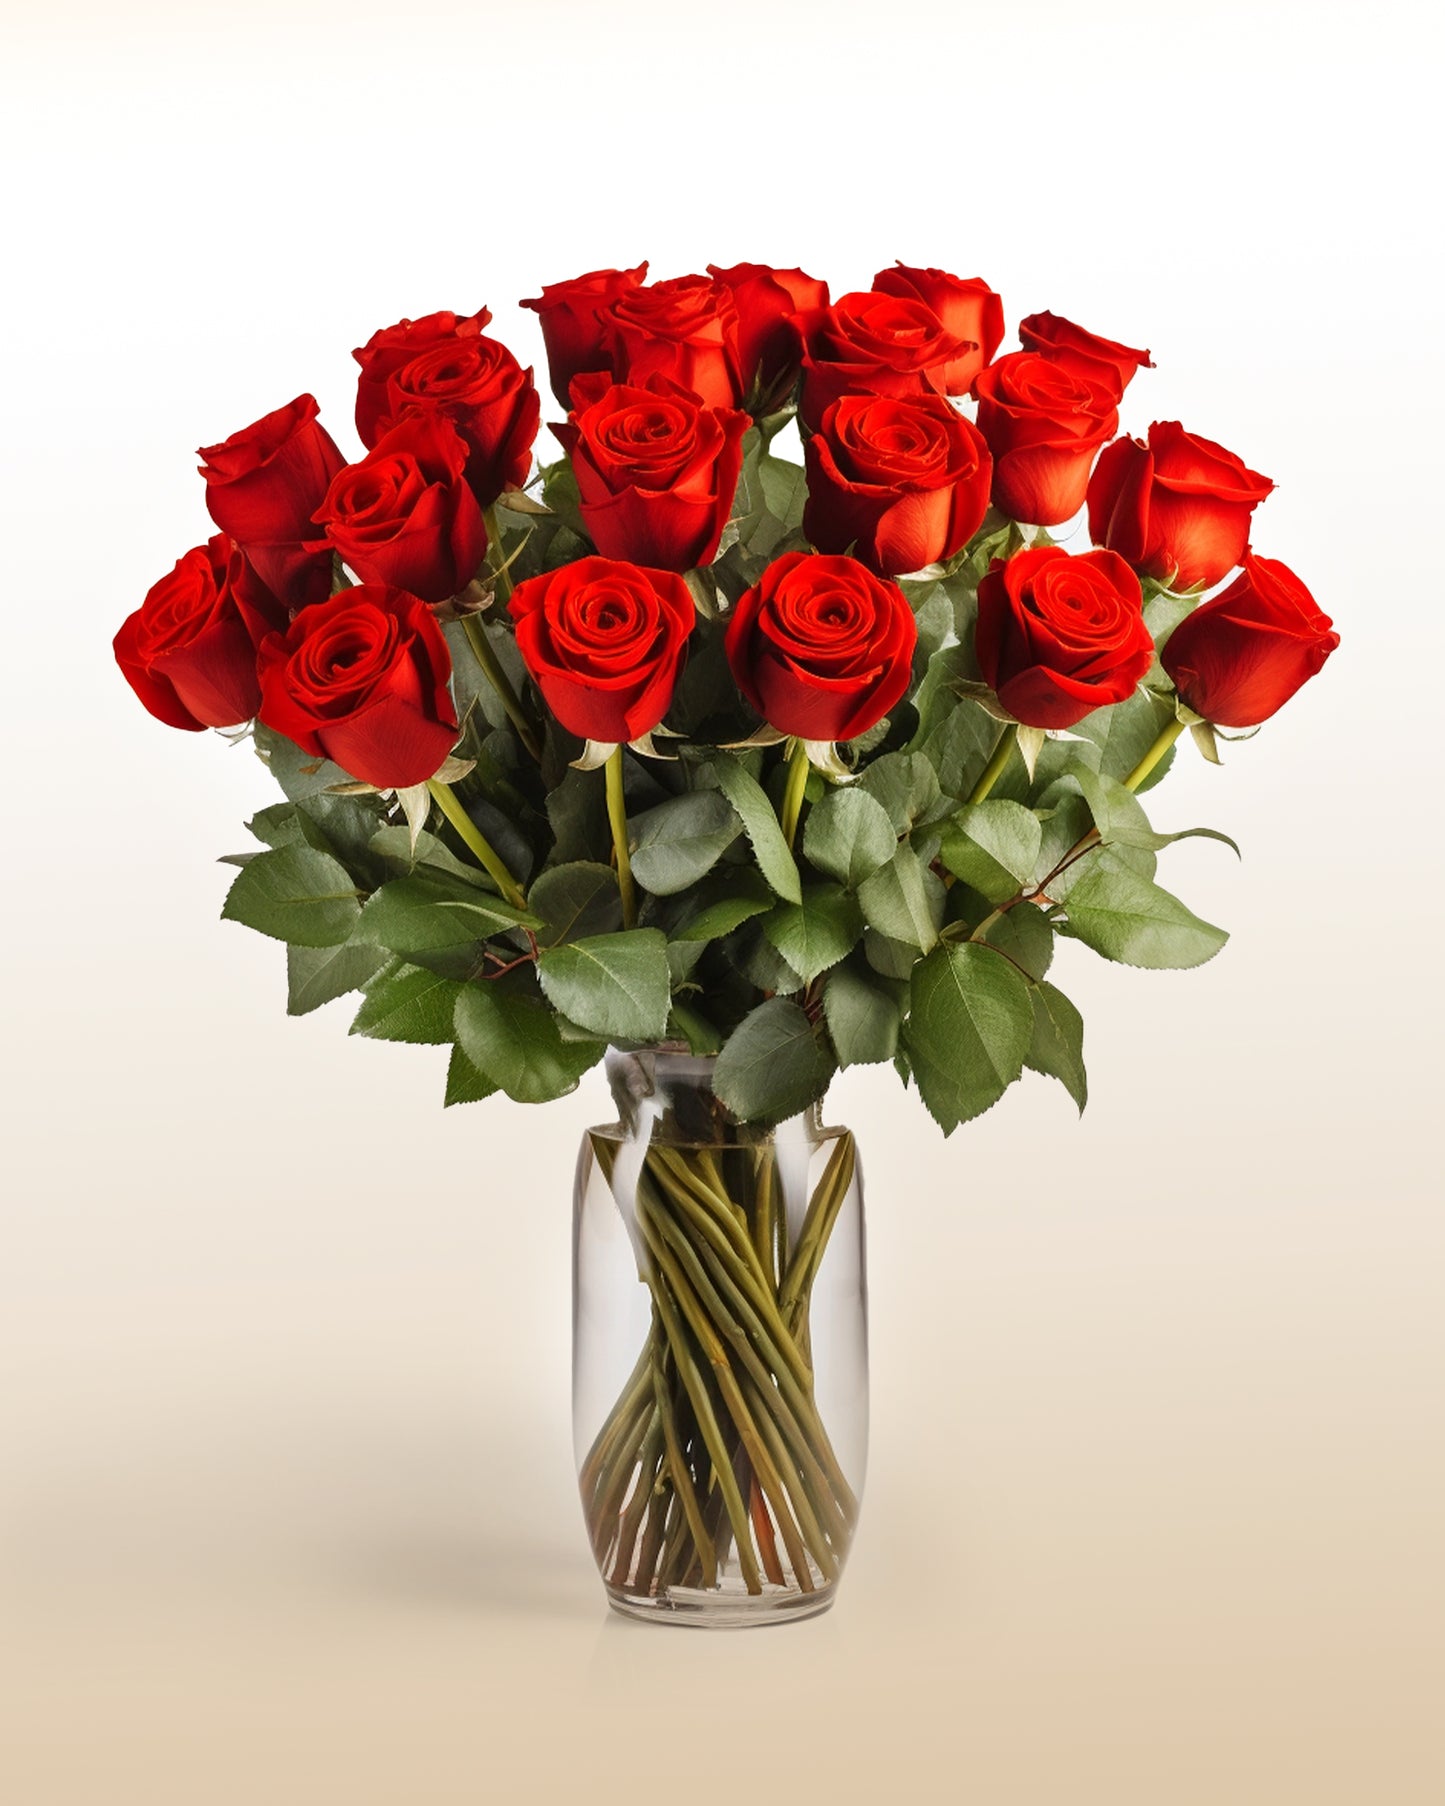 Majestic Red Roses